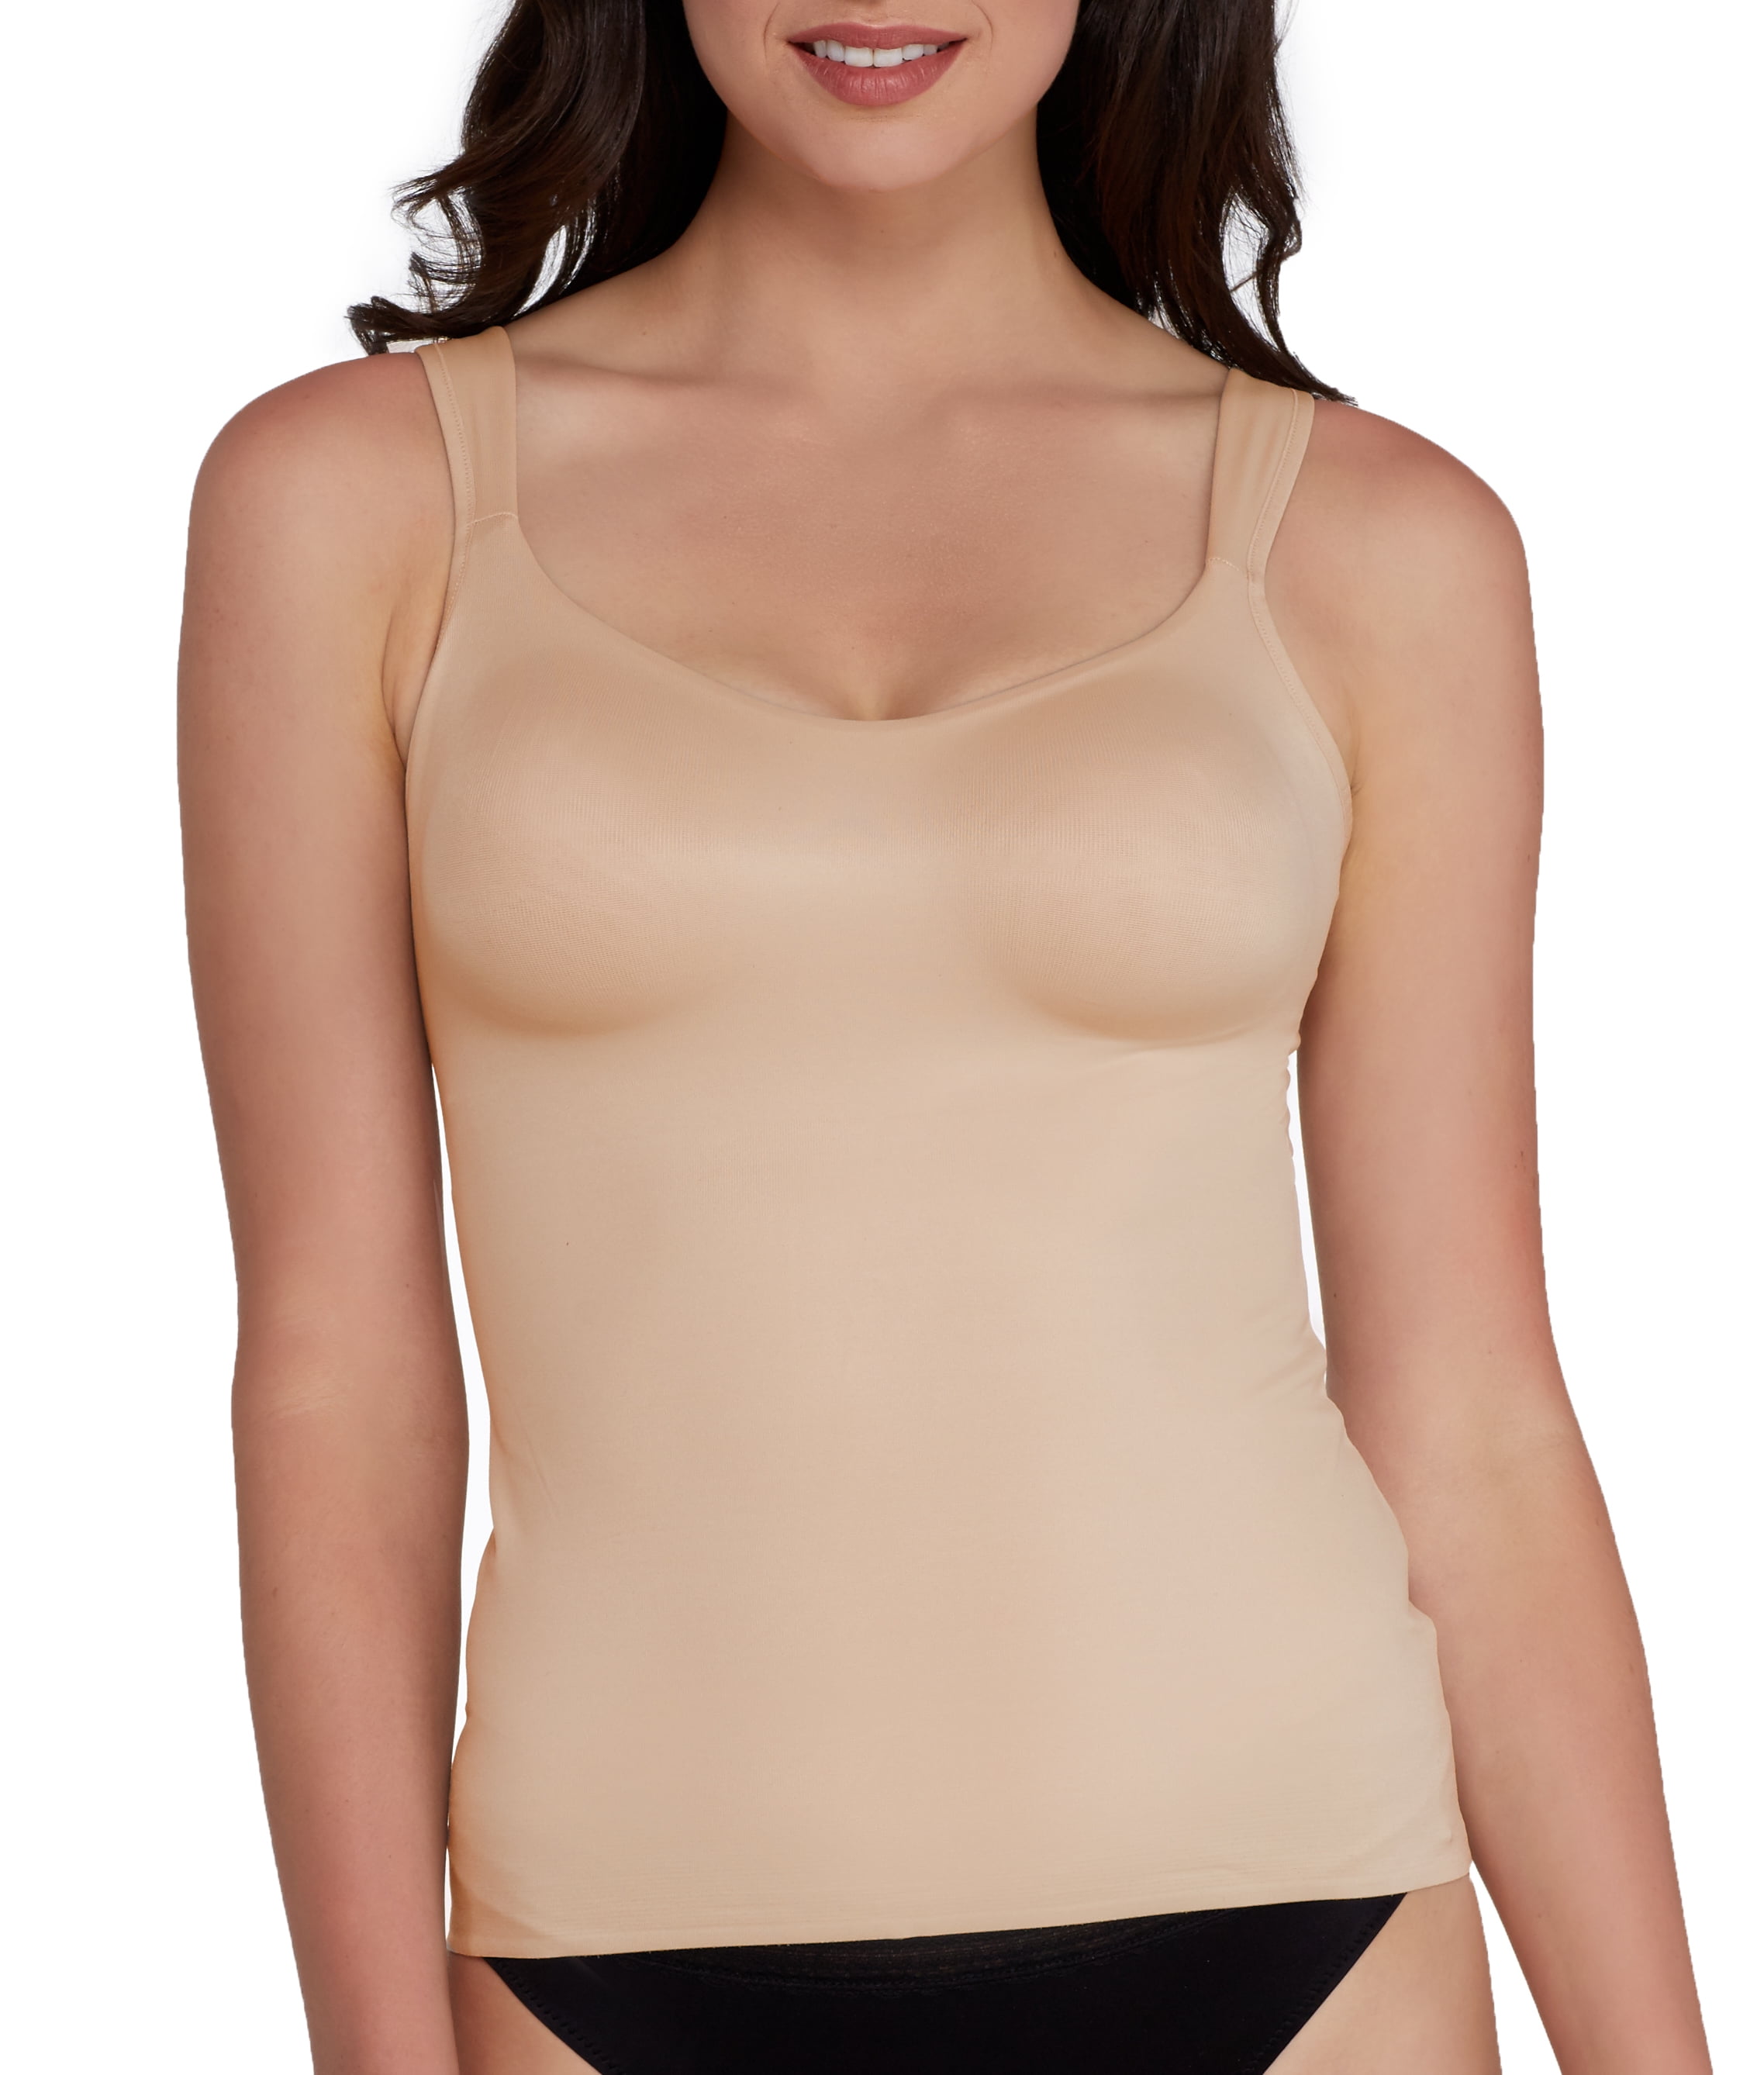 TC Fine Intimates Womens Full Fit Firm Control Camisole Style-4242 